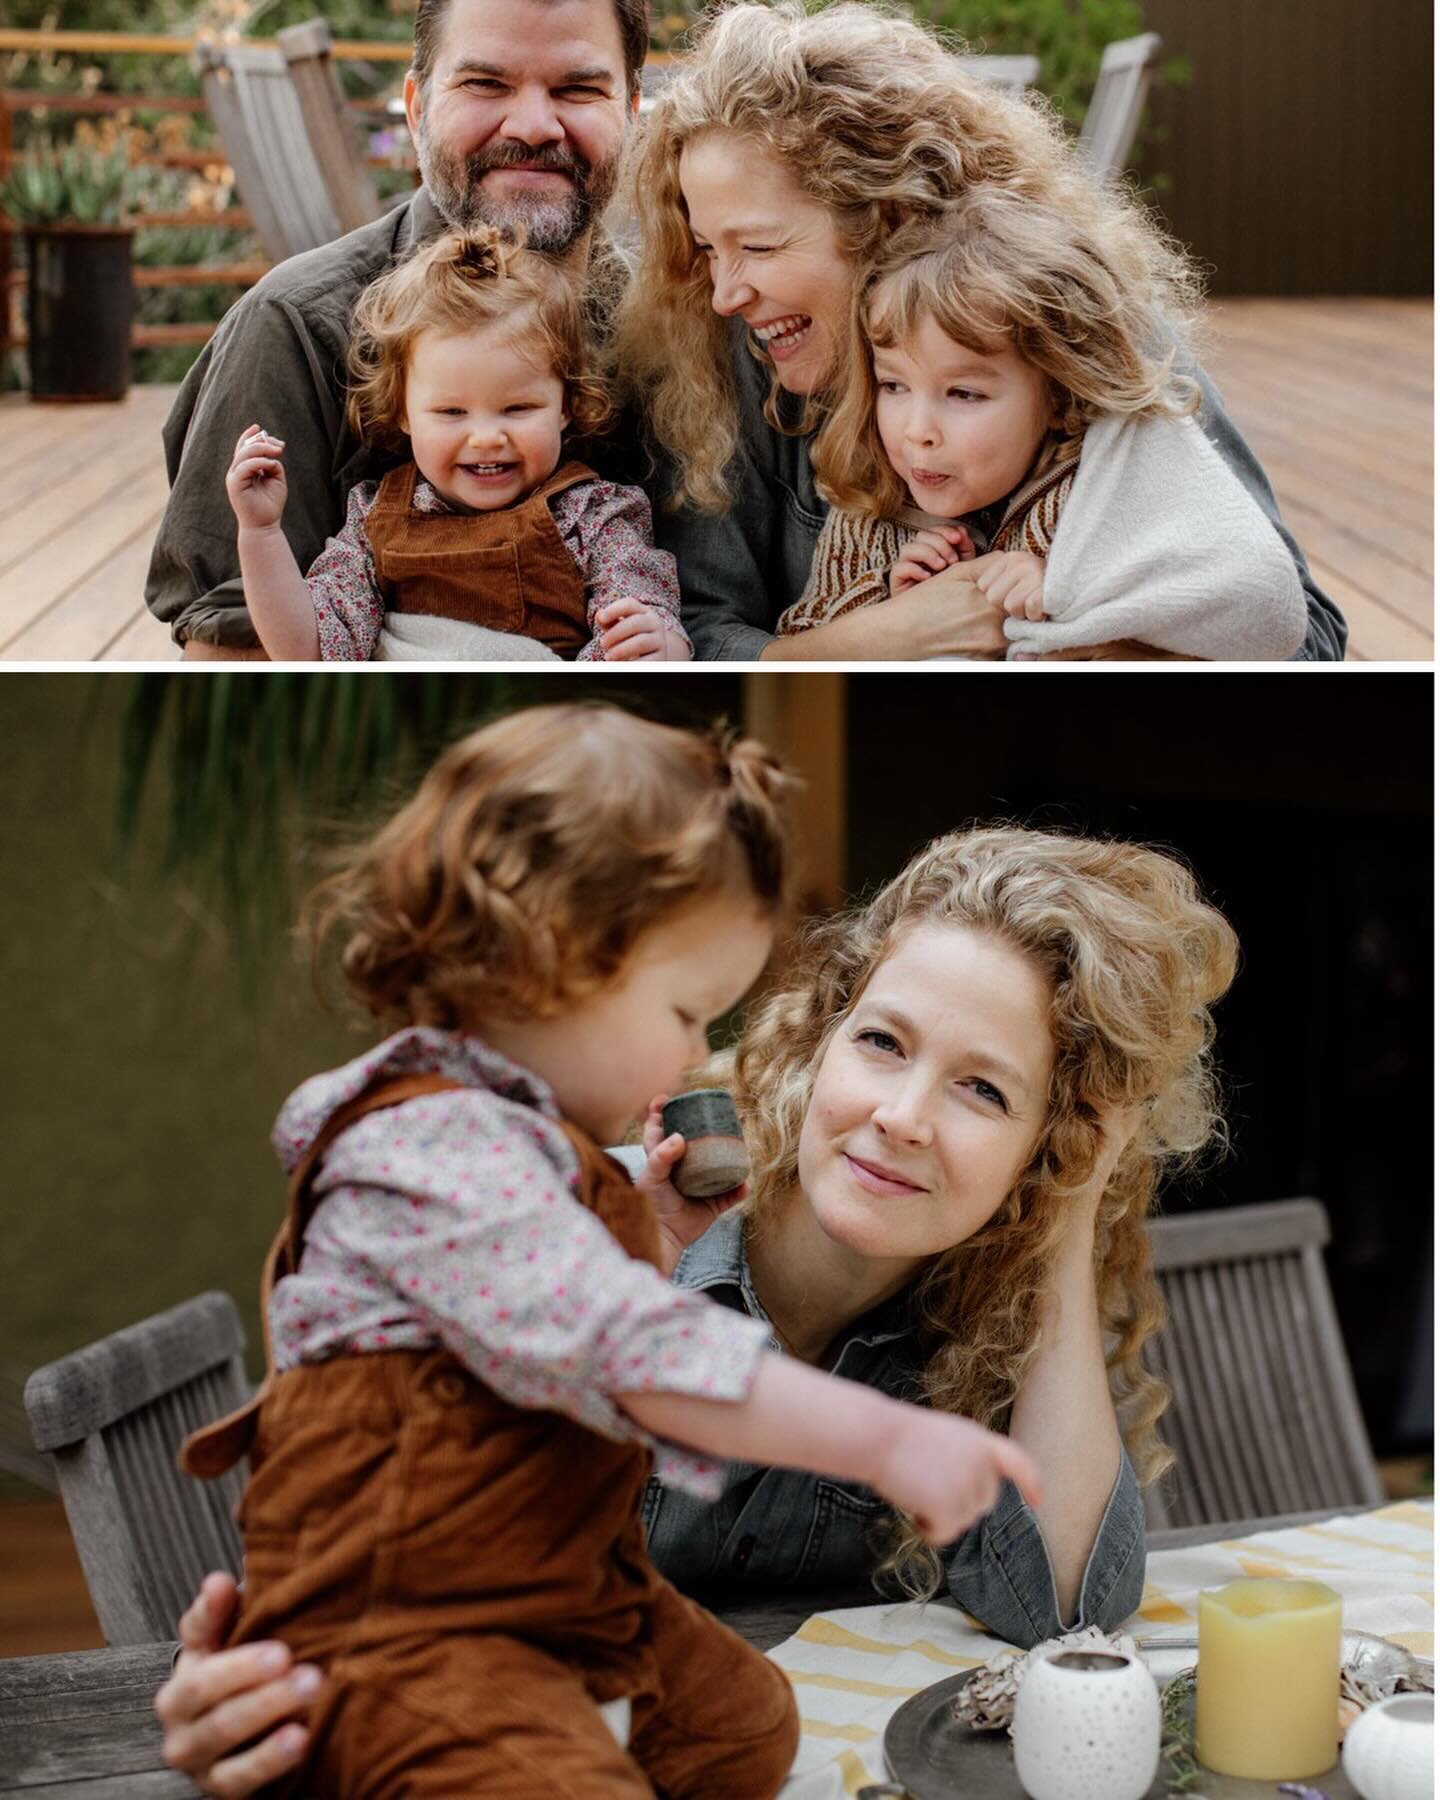 The vision is more about the season of parenthood you&rsquo;re currently in. It&rsquo;s not about just one photo, but the series that tell a story of your crew. 

I have an annual membership for returning clients that has open enrollment in MAY! Thos